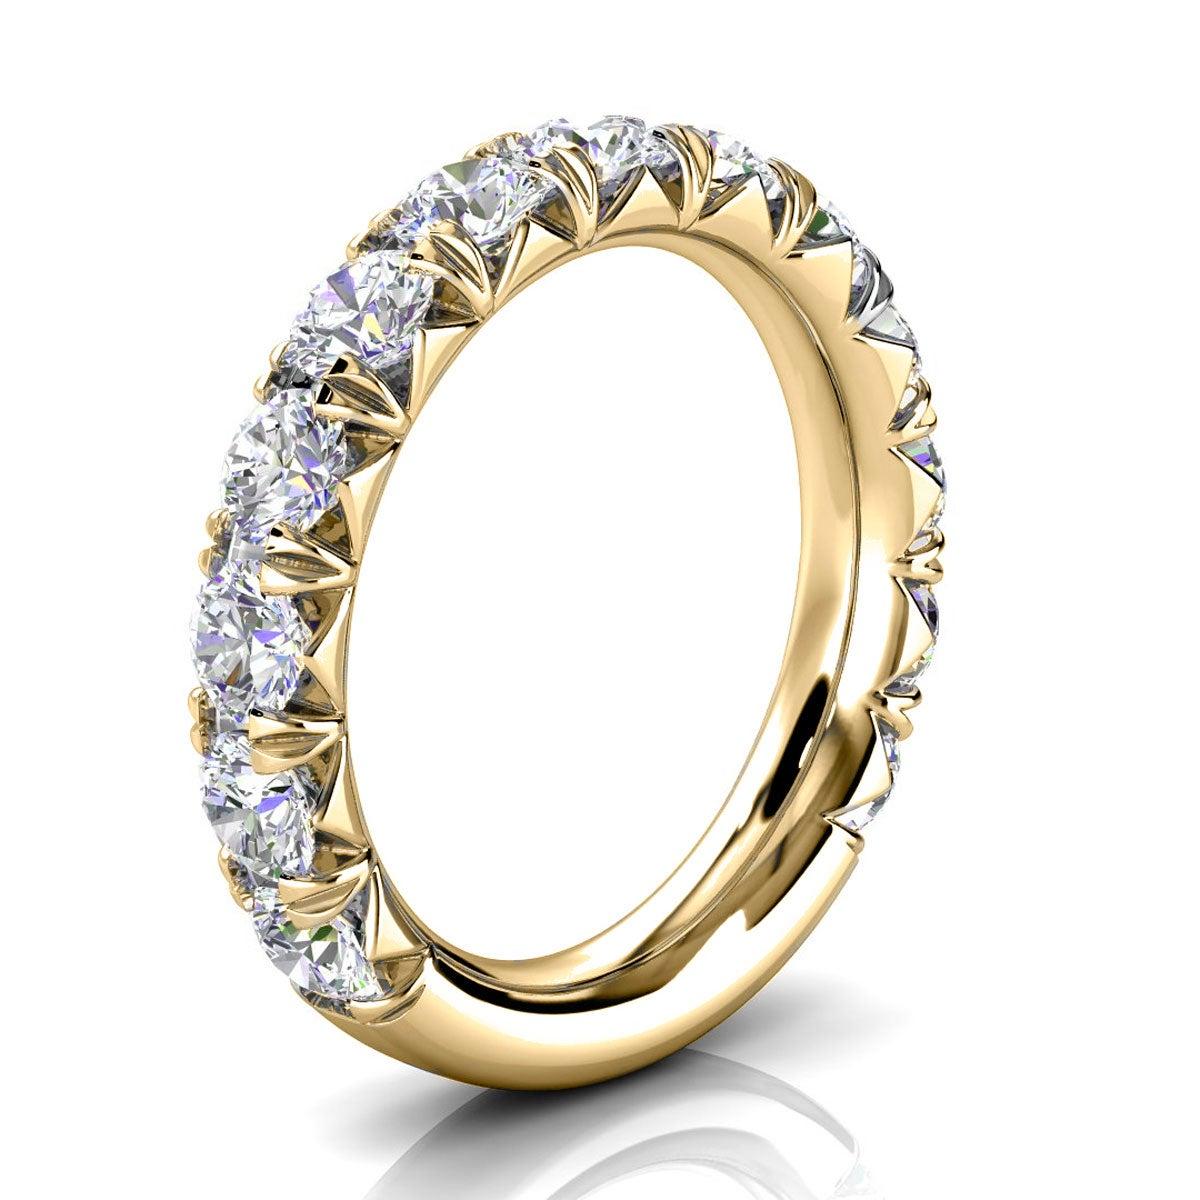 For Sale:  14K Yellow Gold GIA French Pave Diamond Ring '2 Ct. Tw' 2